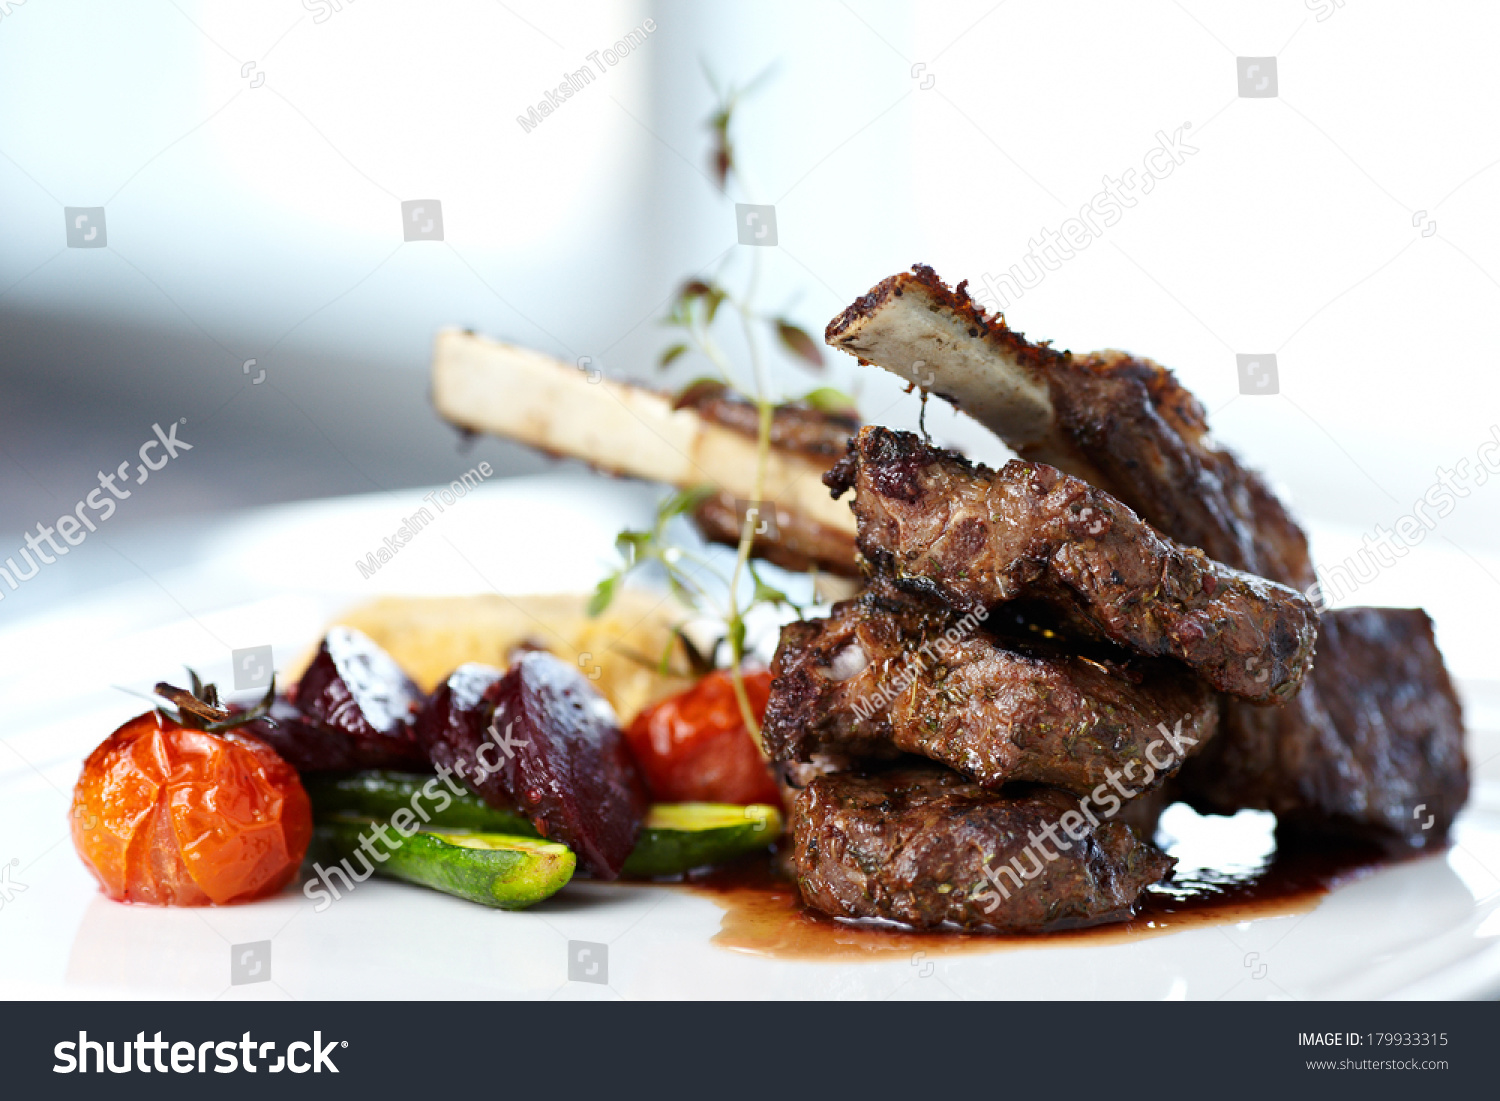 Grilled lamb carre with warm couscous salad, roasted vegetables, Dijon mustard and red wine sauce #179933315